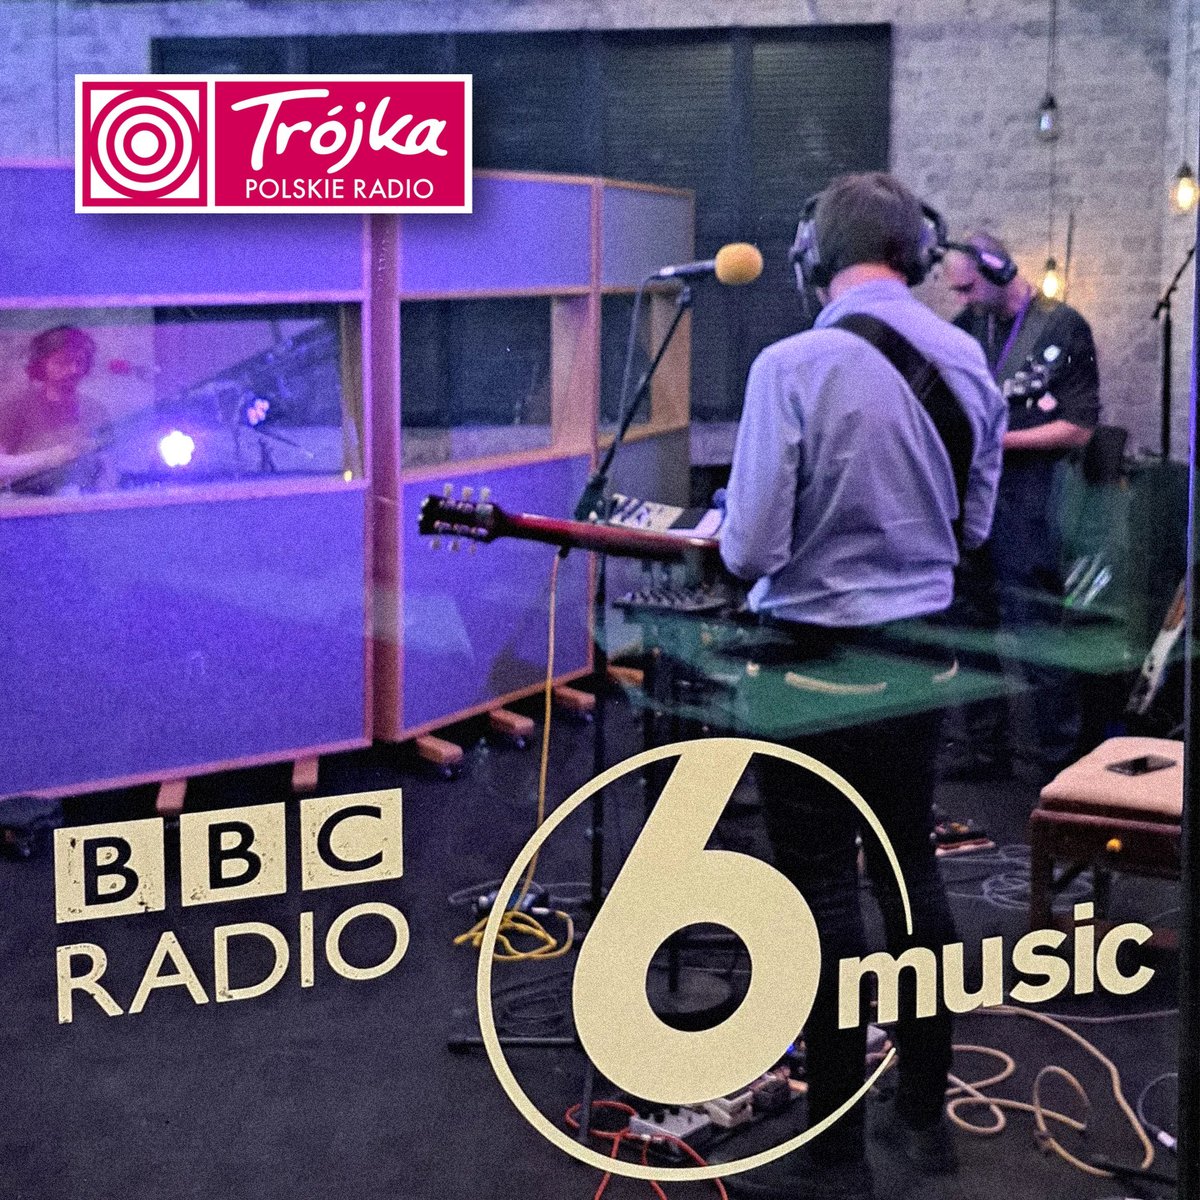 BBC on Polish Radio Three! This evening at 19:00 Polish time, @marcrileydj and @gidcoe along with our music recorded in January at the BBC studio will be featured on the Third Program of Polish Radio. You can listen to this rebroadcast on the website trojka.polskieradio.pl